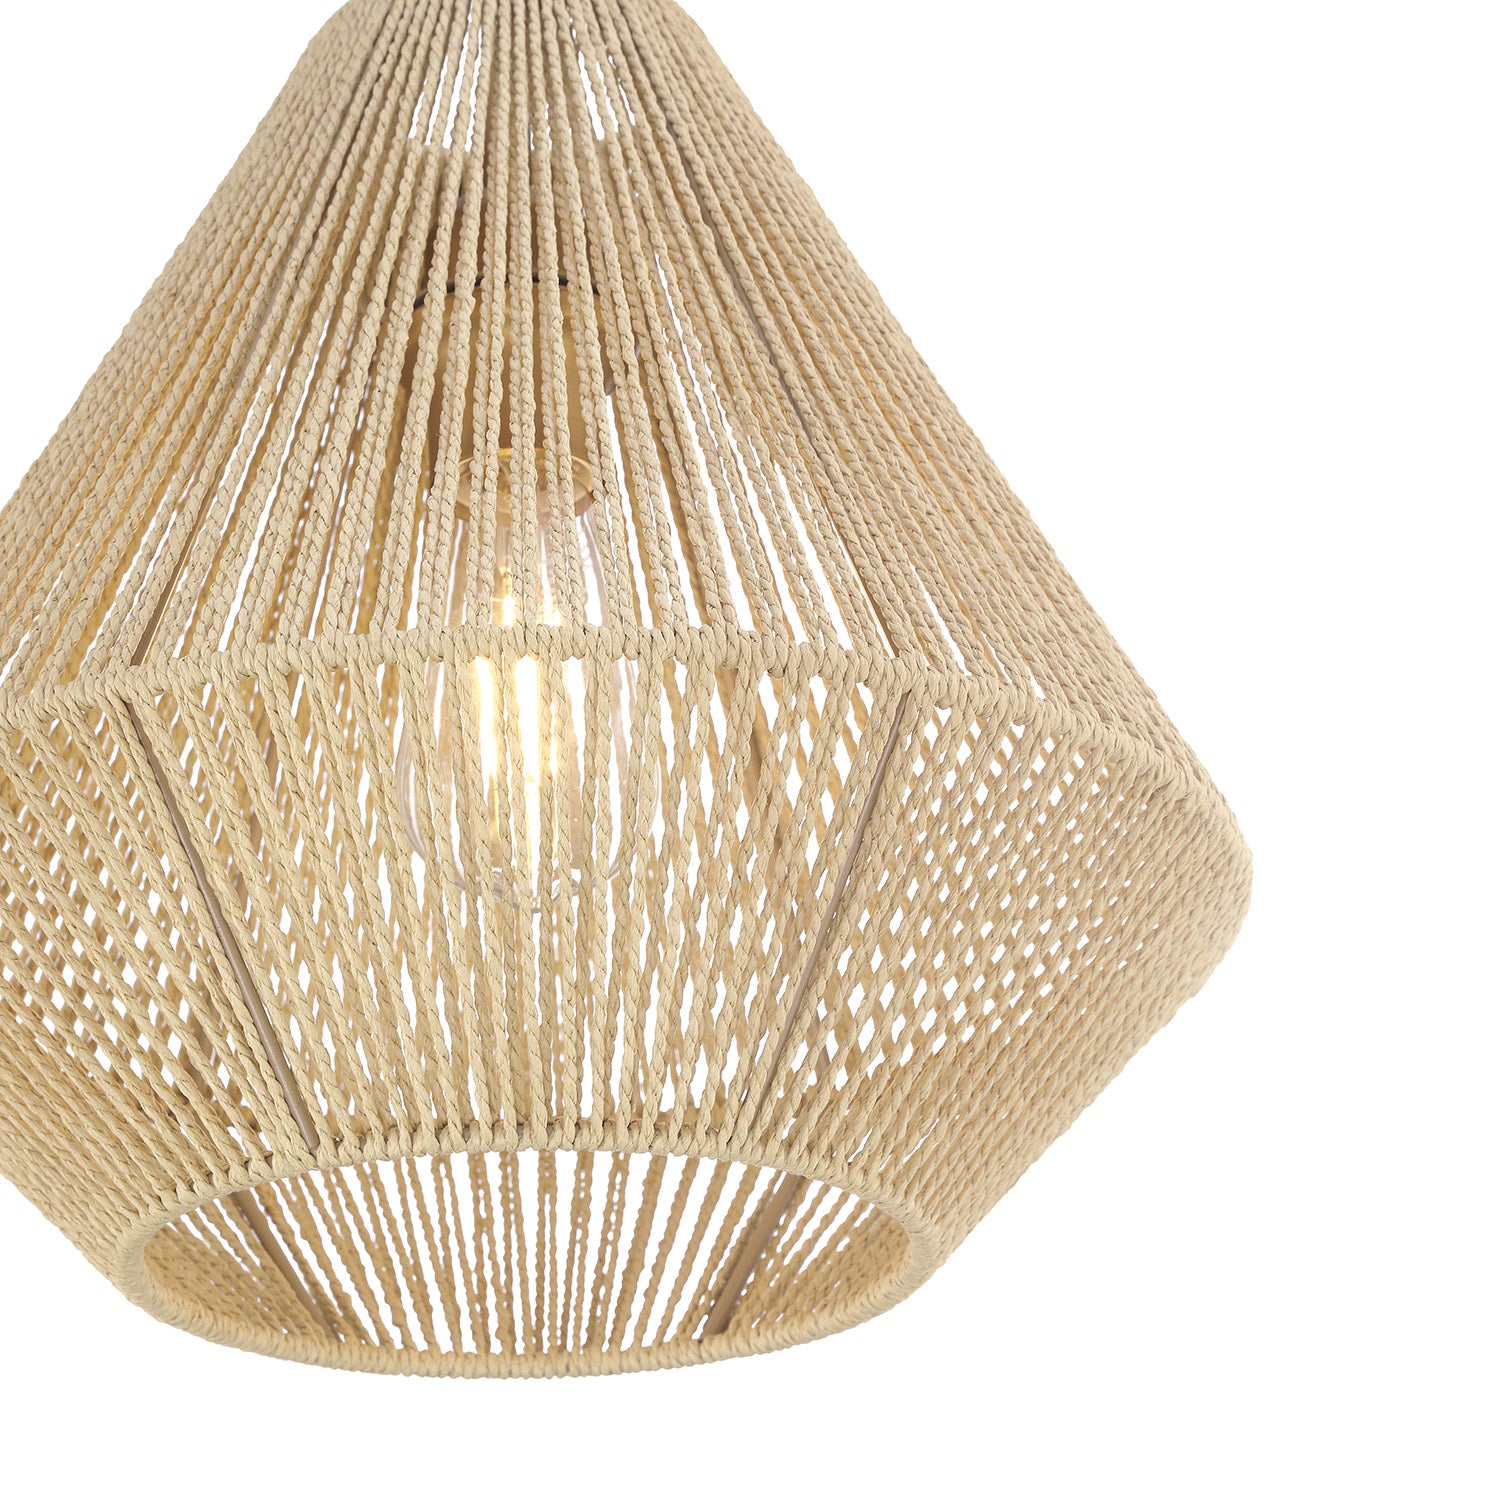 Farrah Small Jute Pendant, Natural and Aged Brass